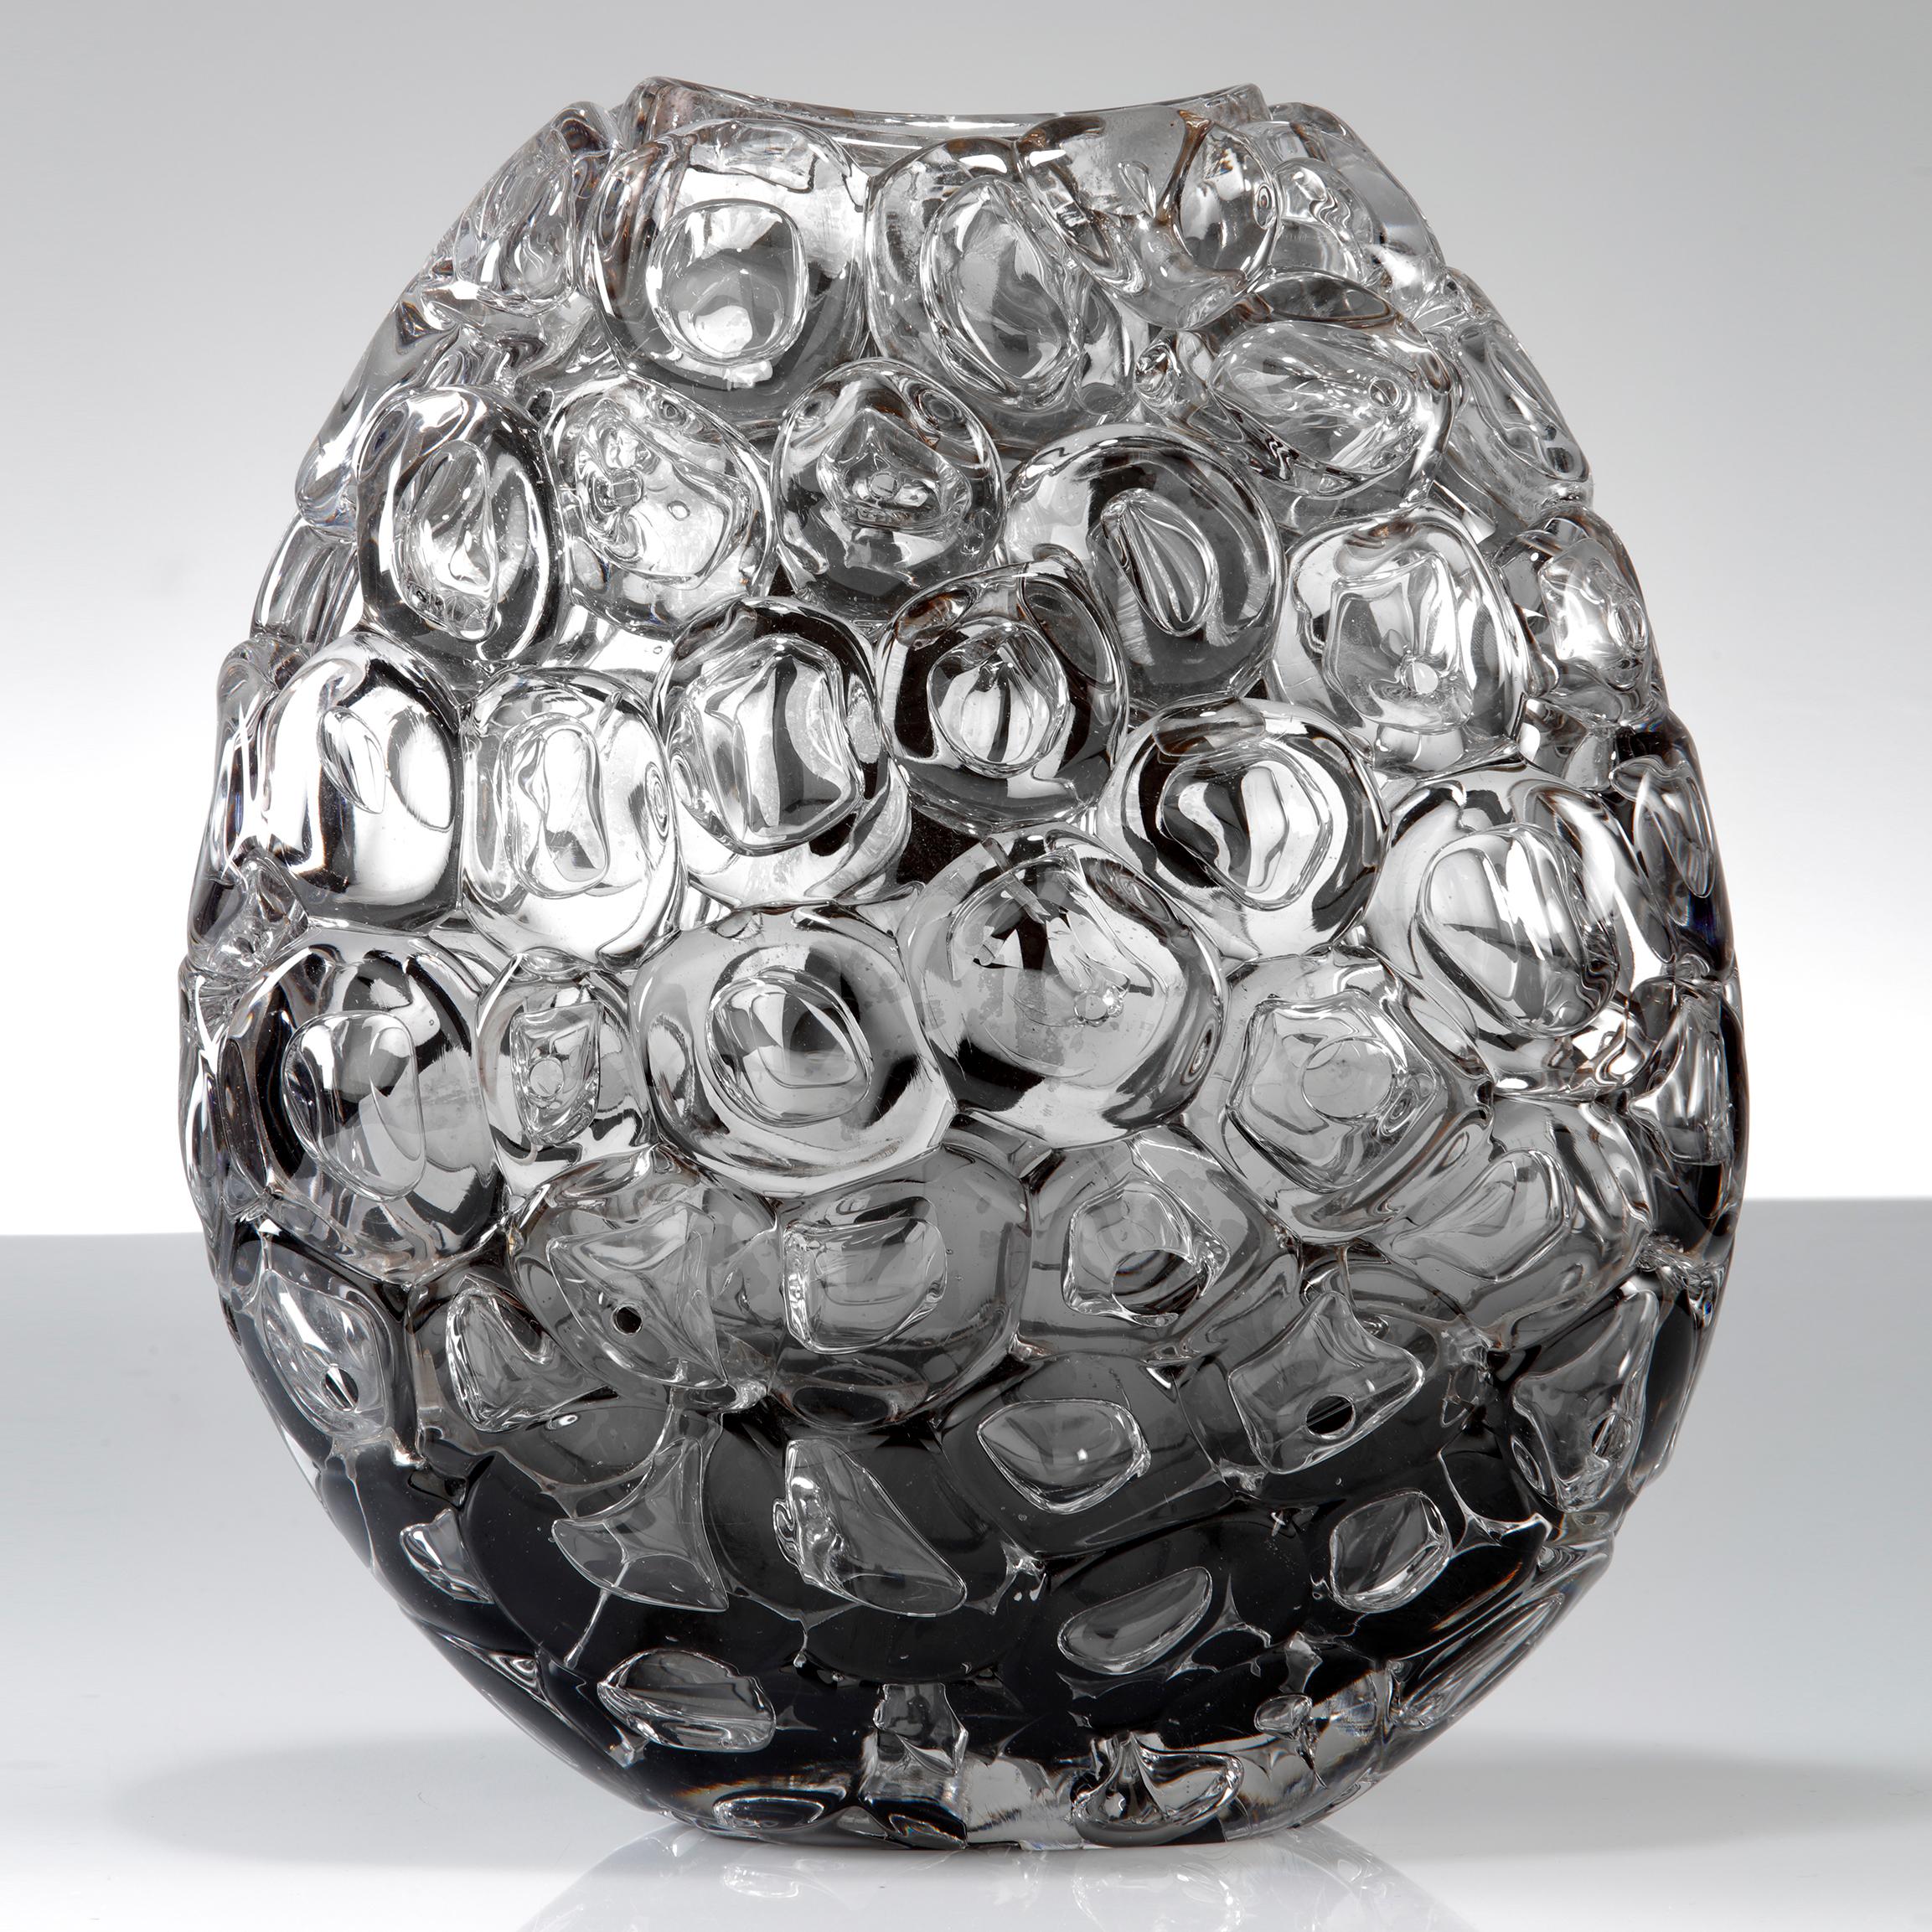 Organic Modern Bubblewrap in Monochrome I, a Silver and Clear Glass Vase by Allister Malcolm